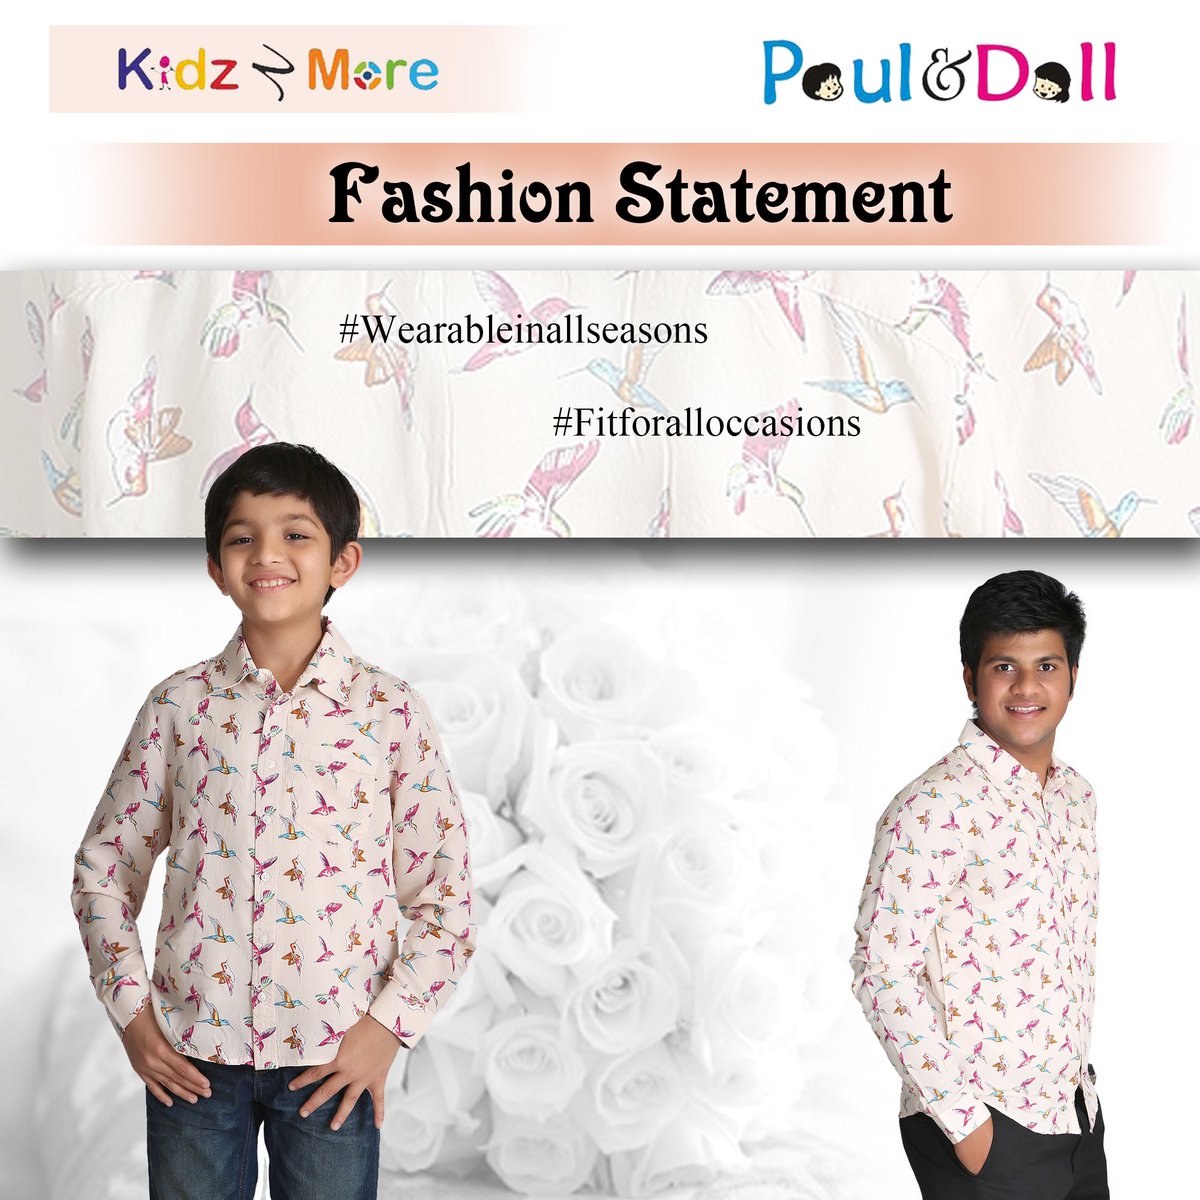 Be a trendsetter and lead the peers with our Designer Printed Shirts.
 #YoungMen  #Celebratechildhood  #Betheboss 
bit.ly/2eysF0p